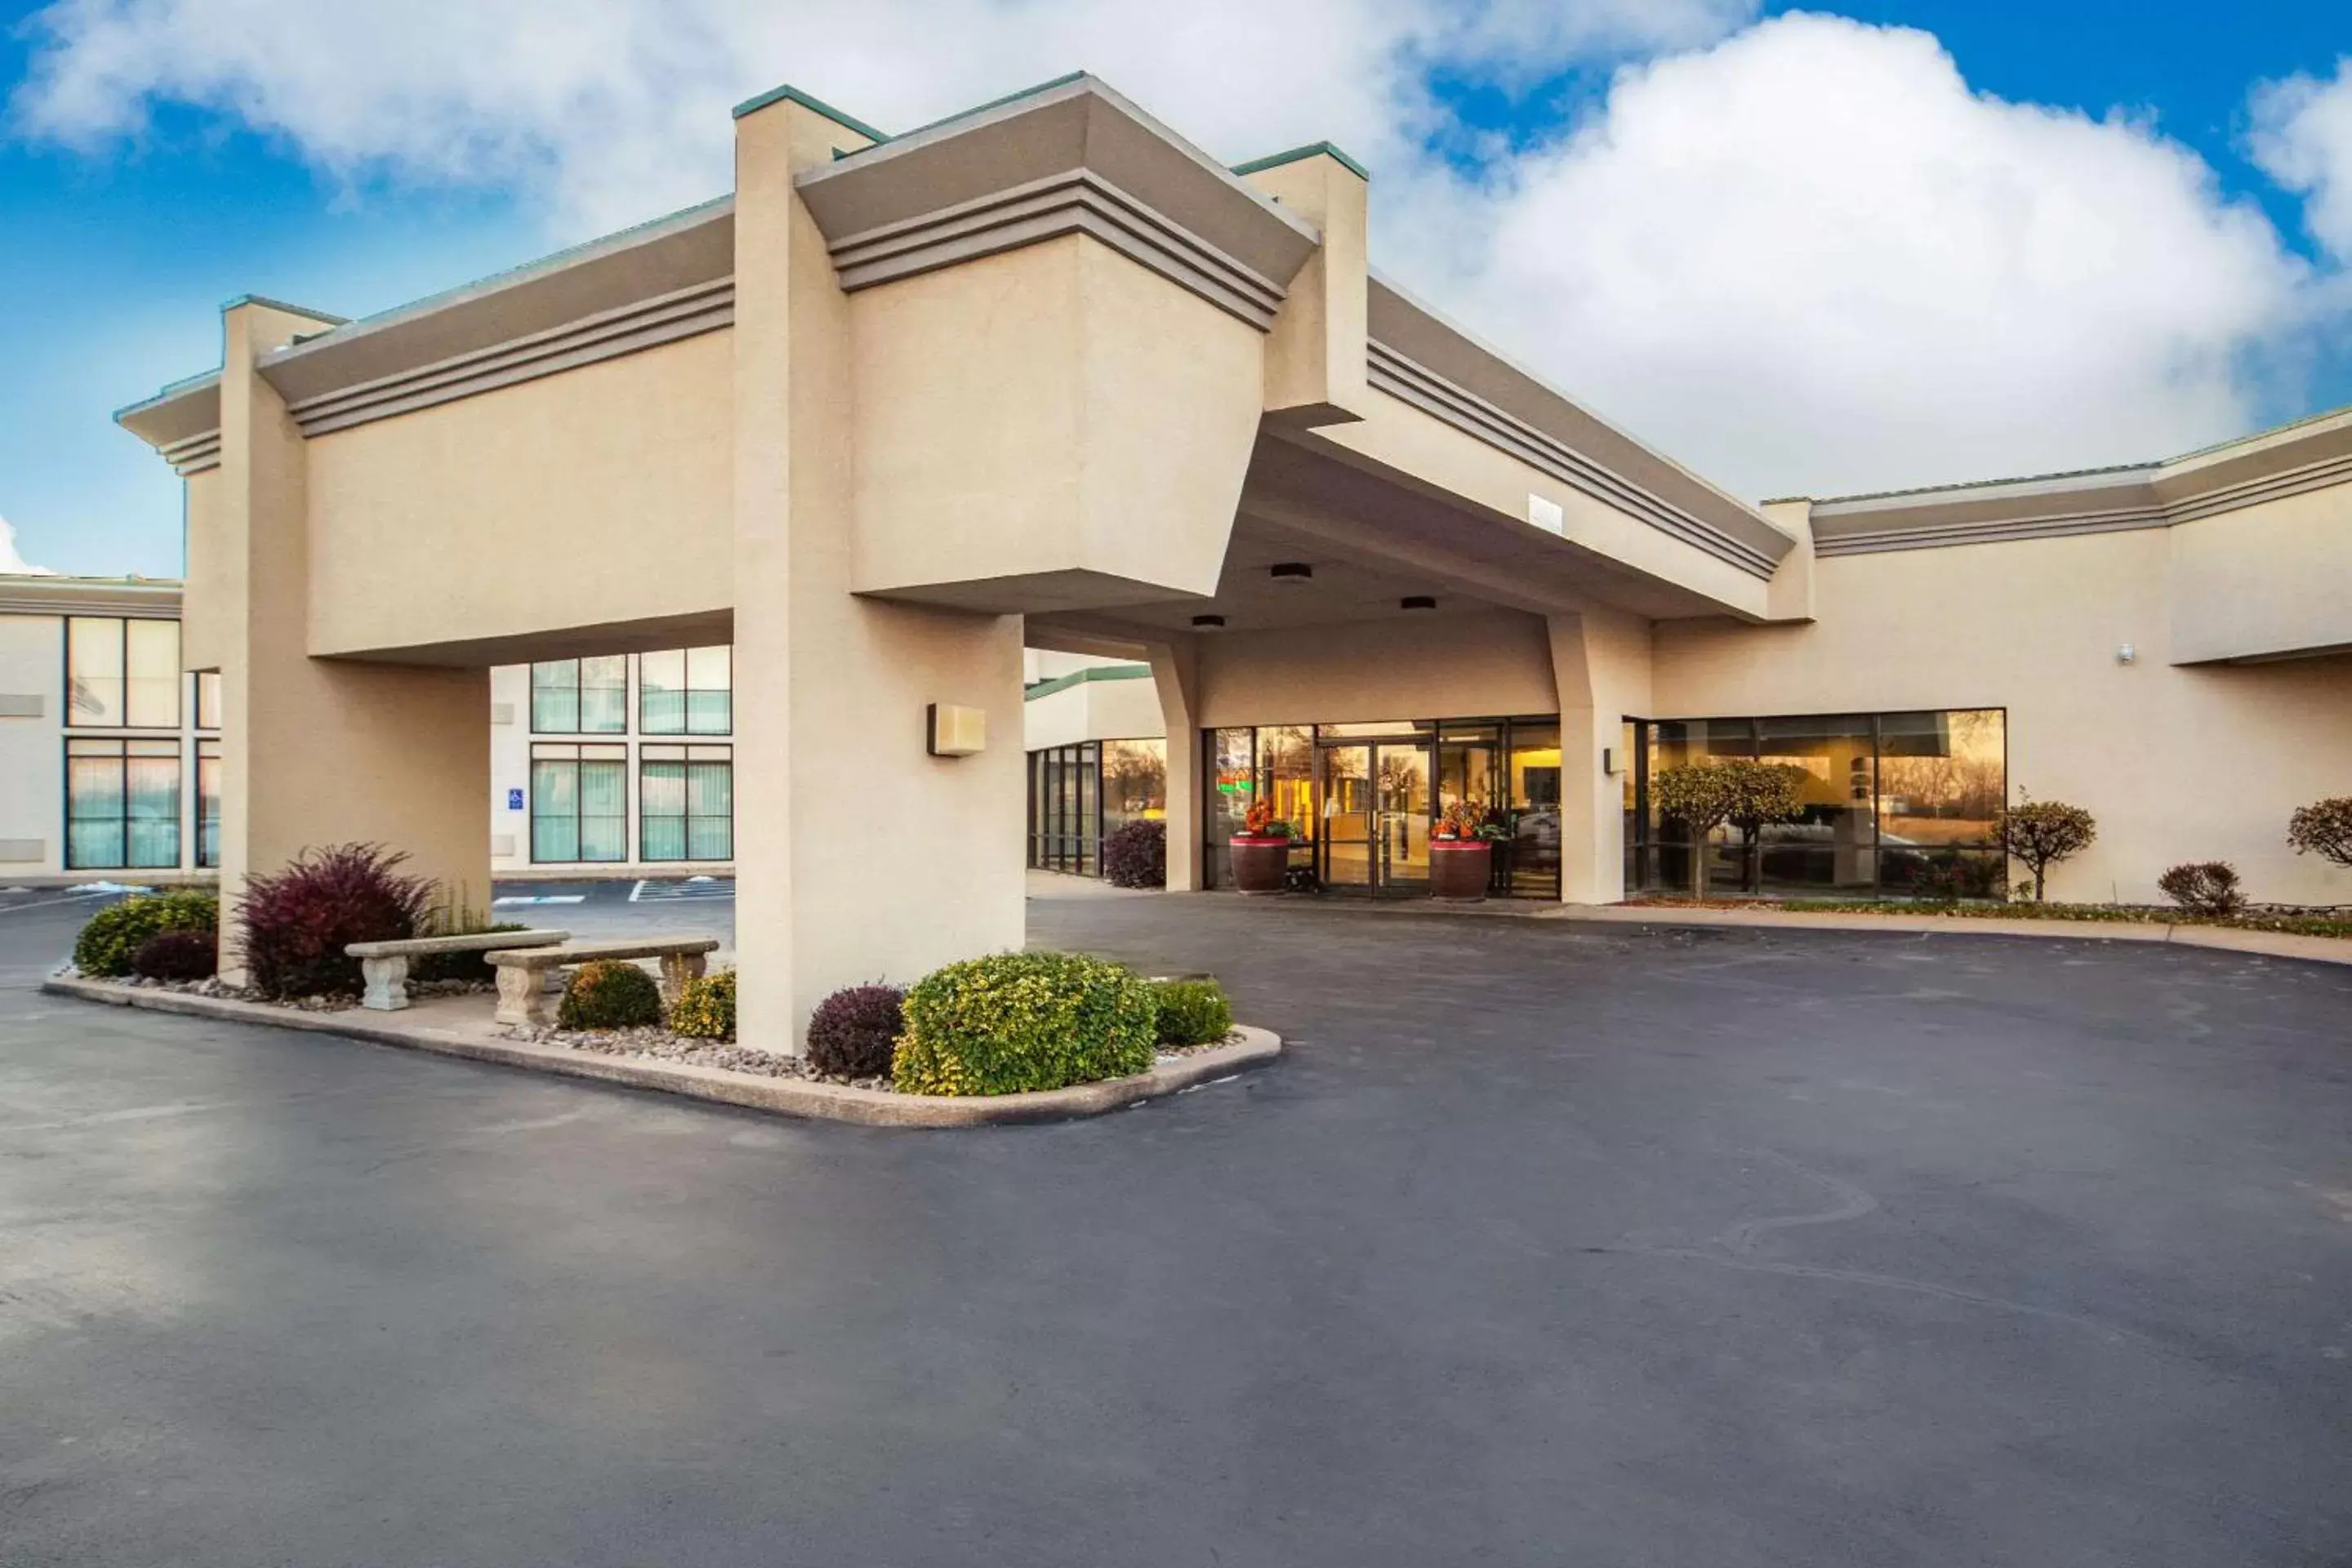 Property Building in Quality Inn and Conference Center I-80 Grand Island